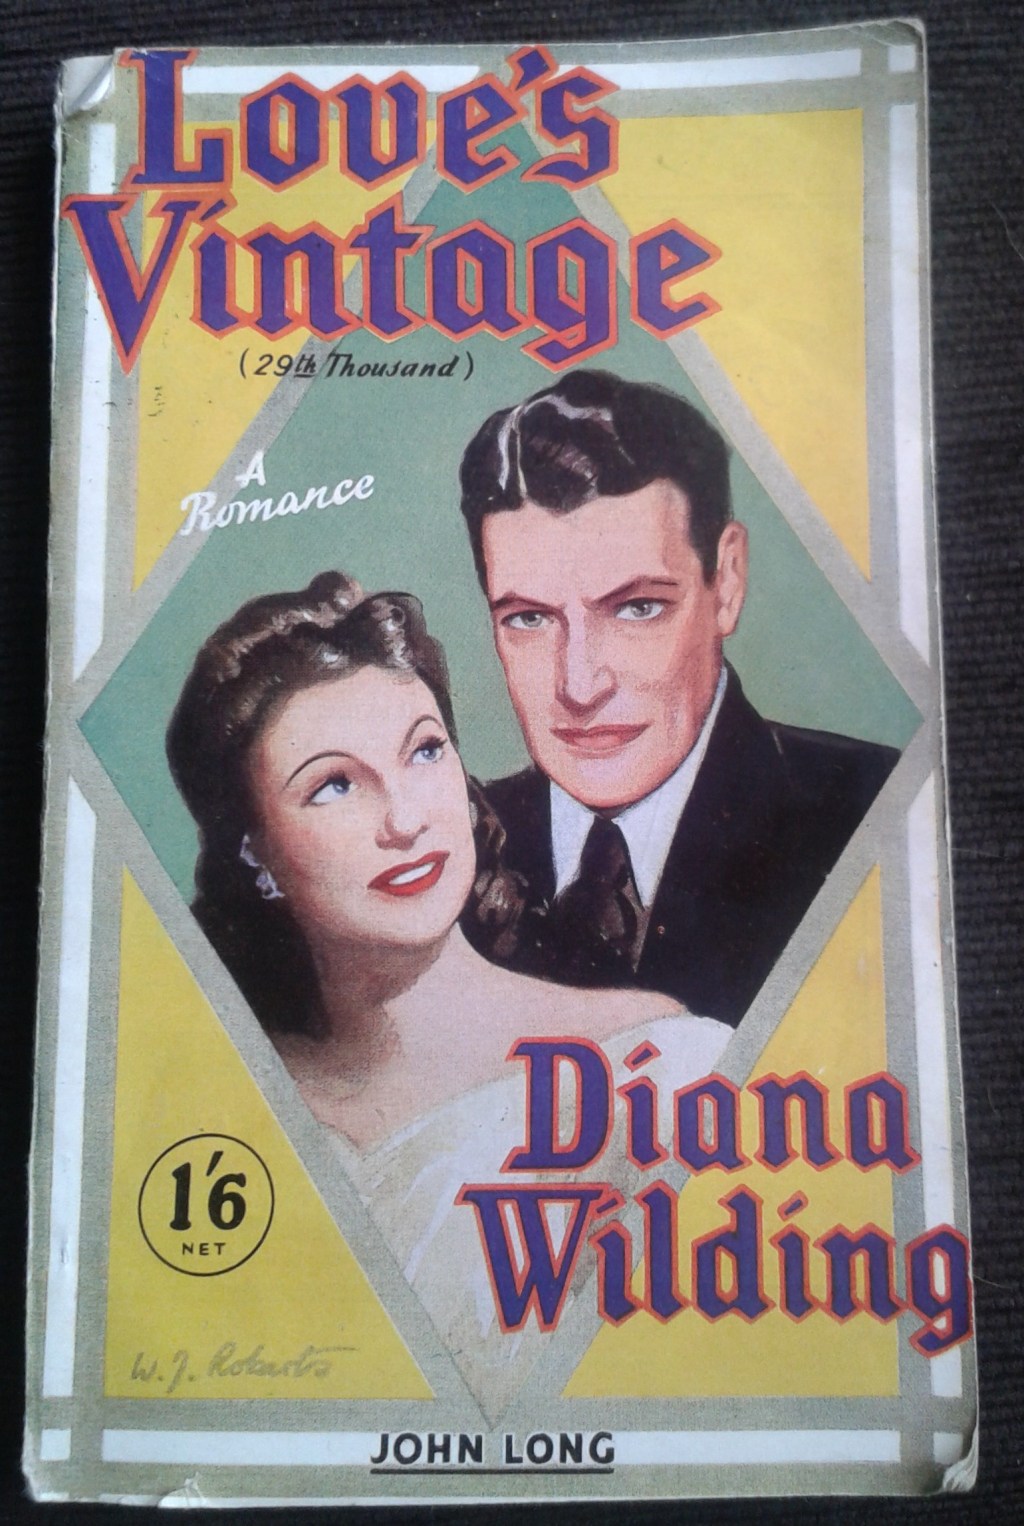 Love’s Vintage: a review of a 1940s romance, plus an all time classic adventure story